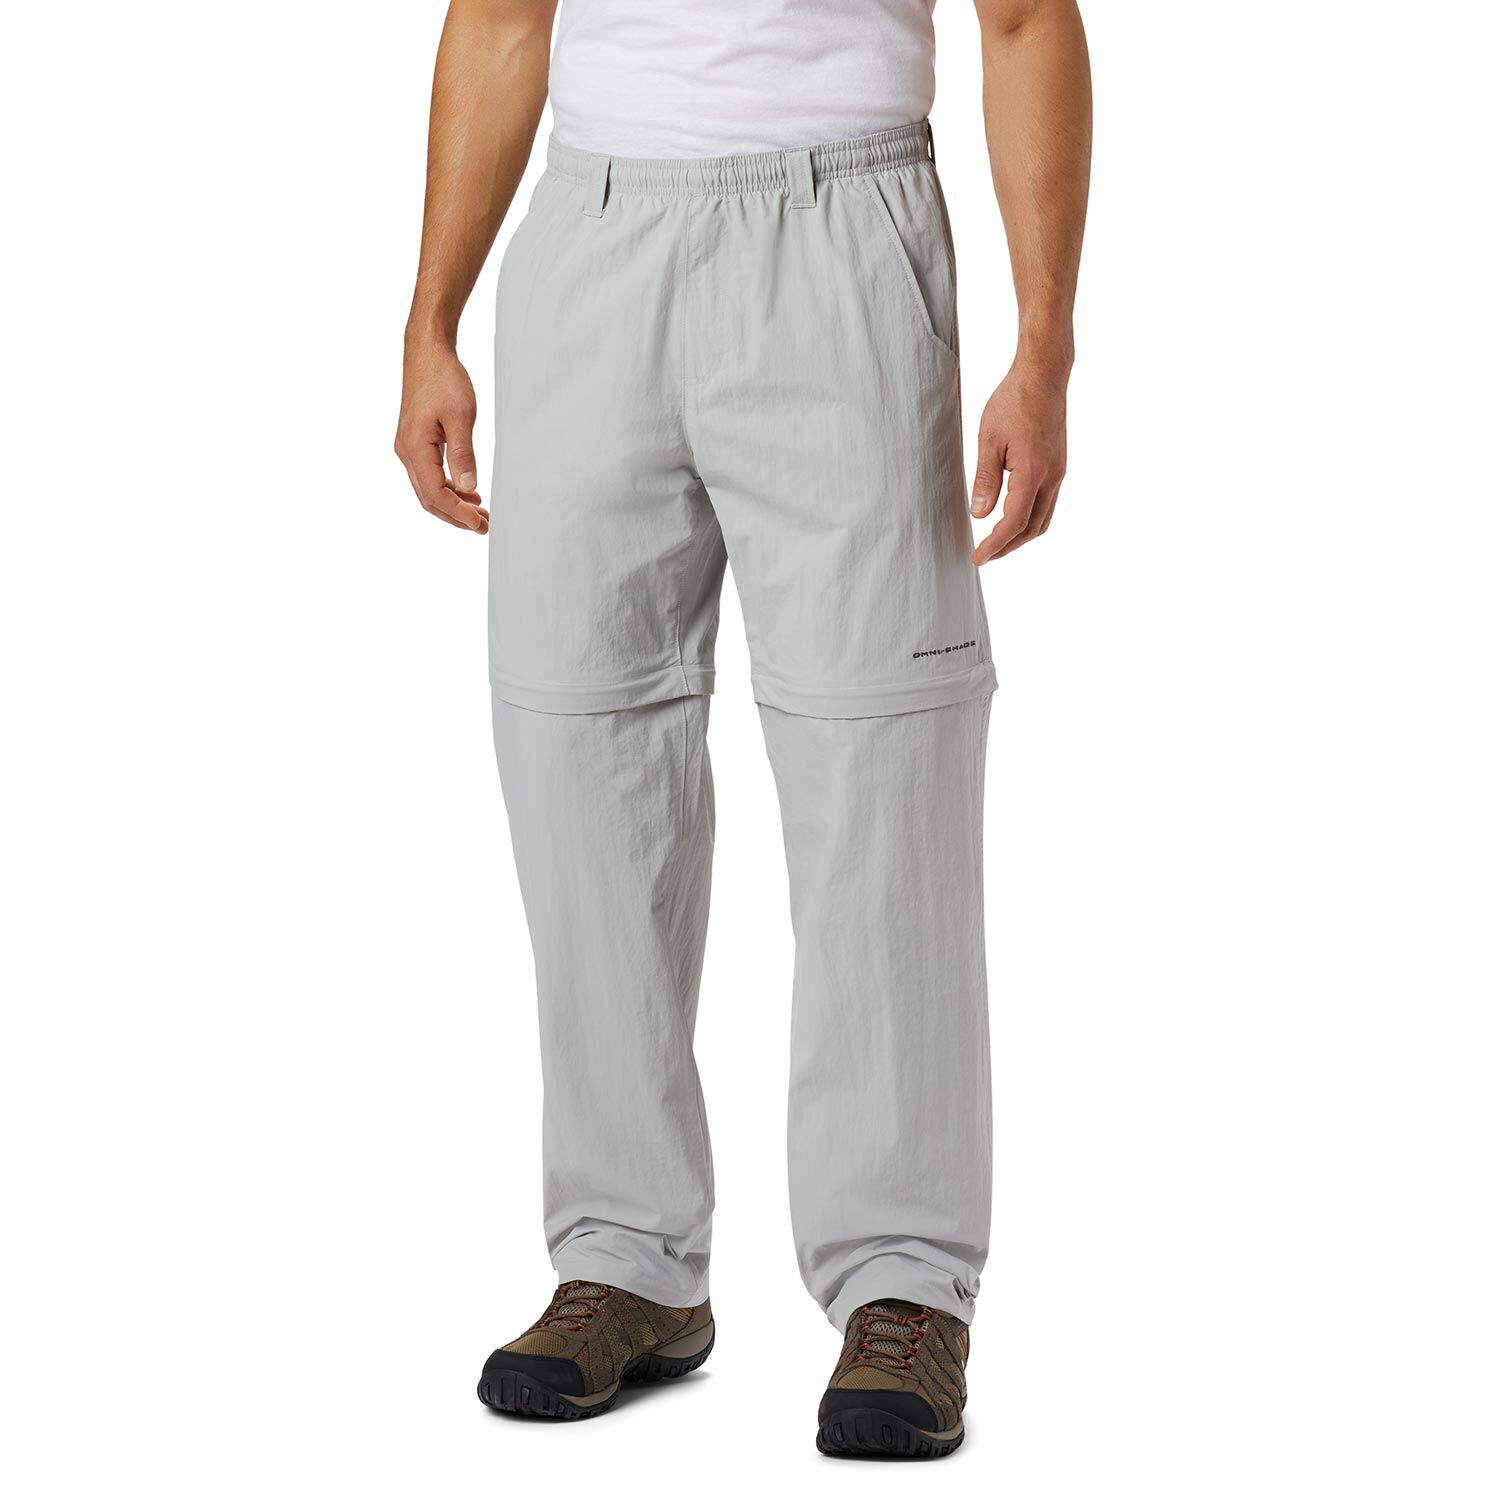 Convertible Trousers  Buy Convertible Trousers online in India